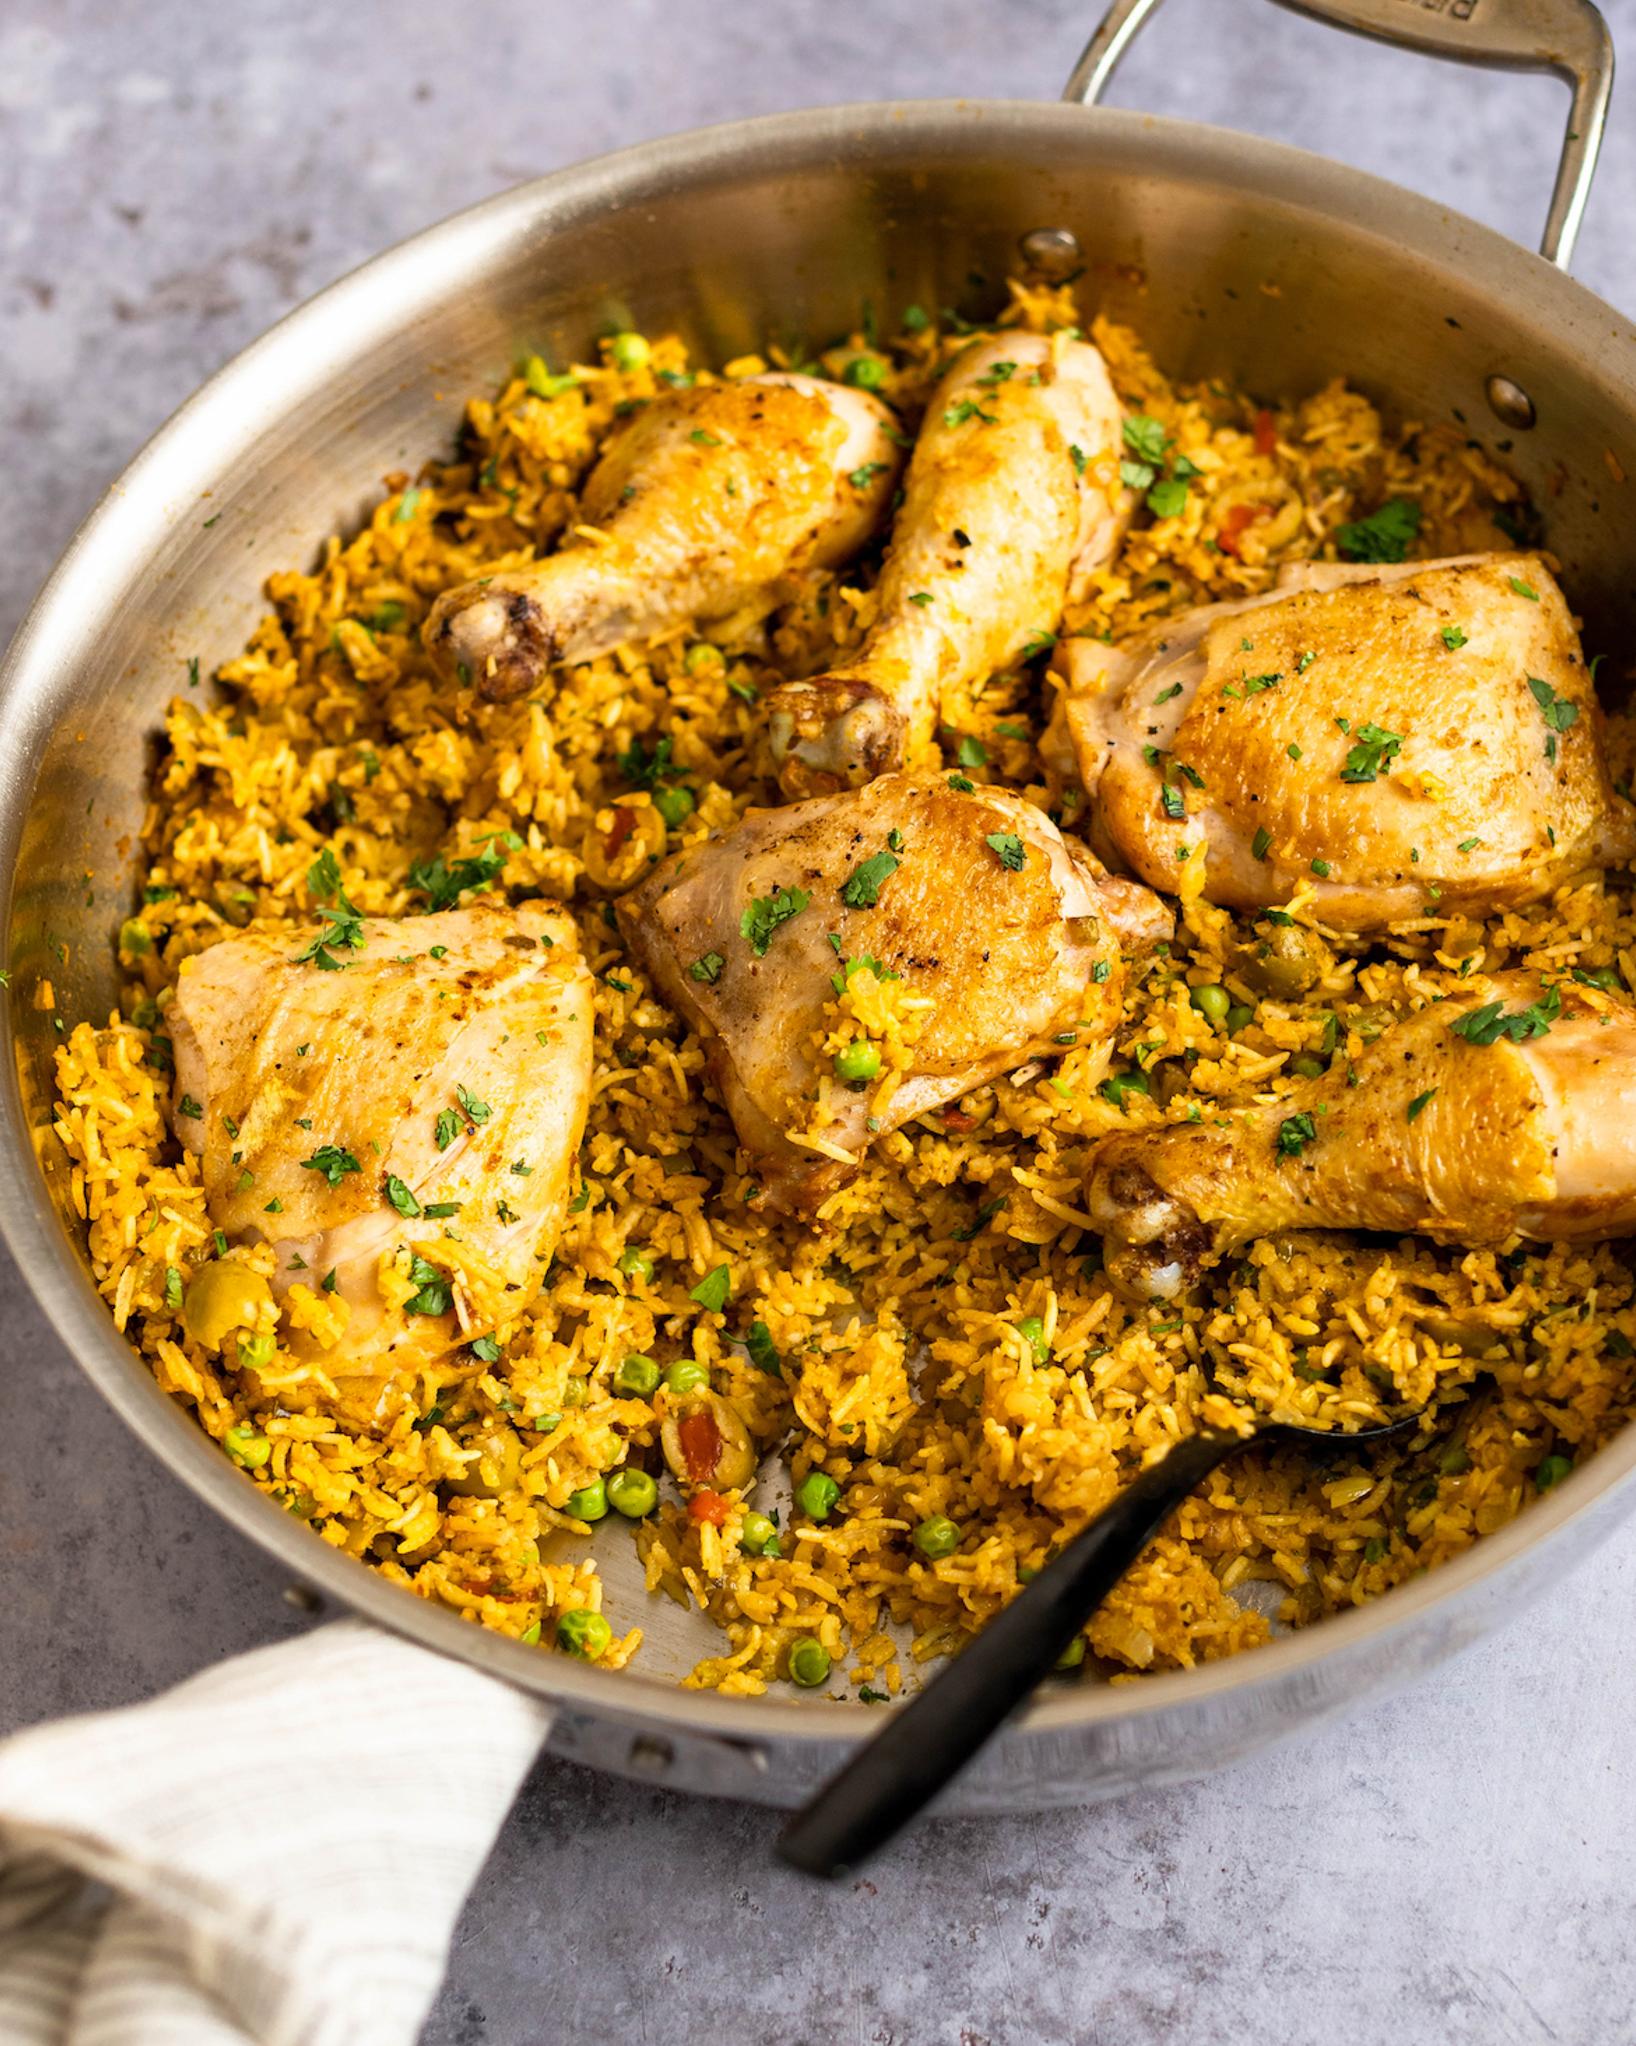  Get ready to impress your dinner guests with this simple yet satisfying Arroz con Pollo recipe